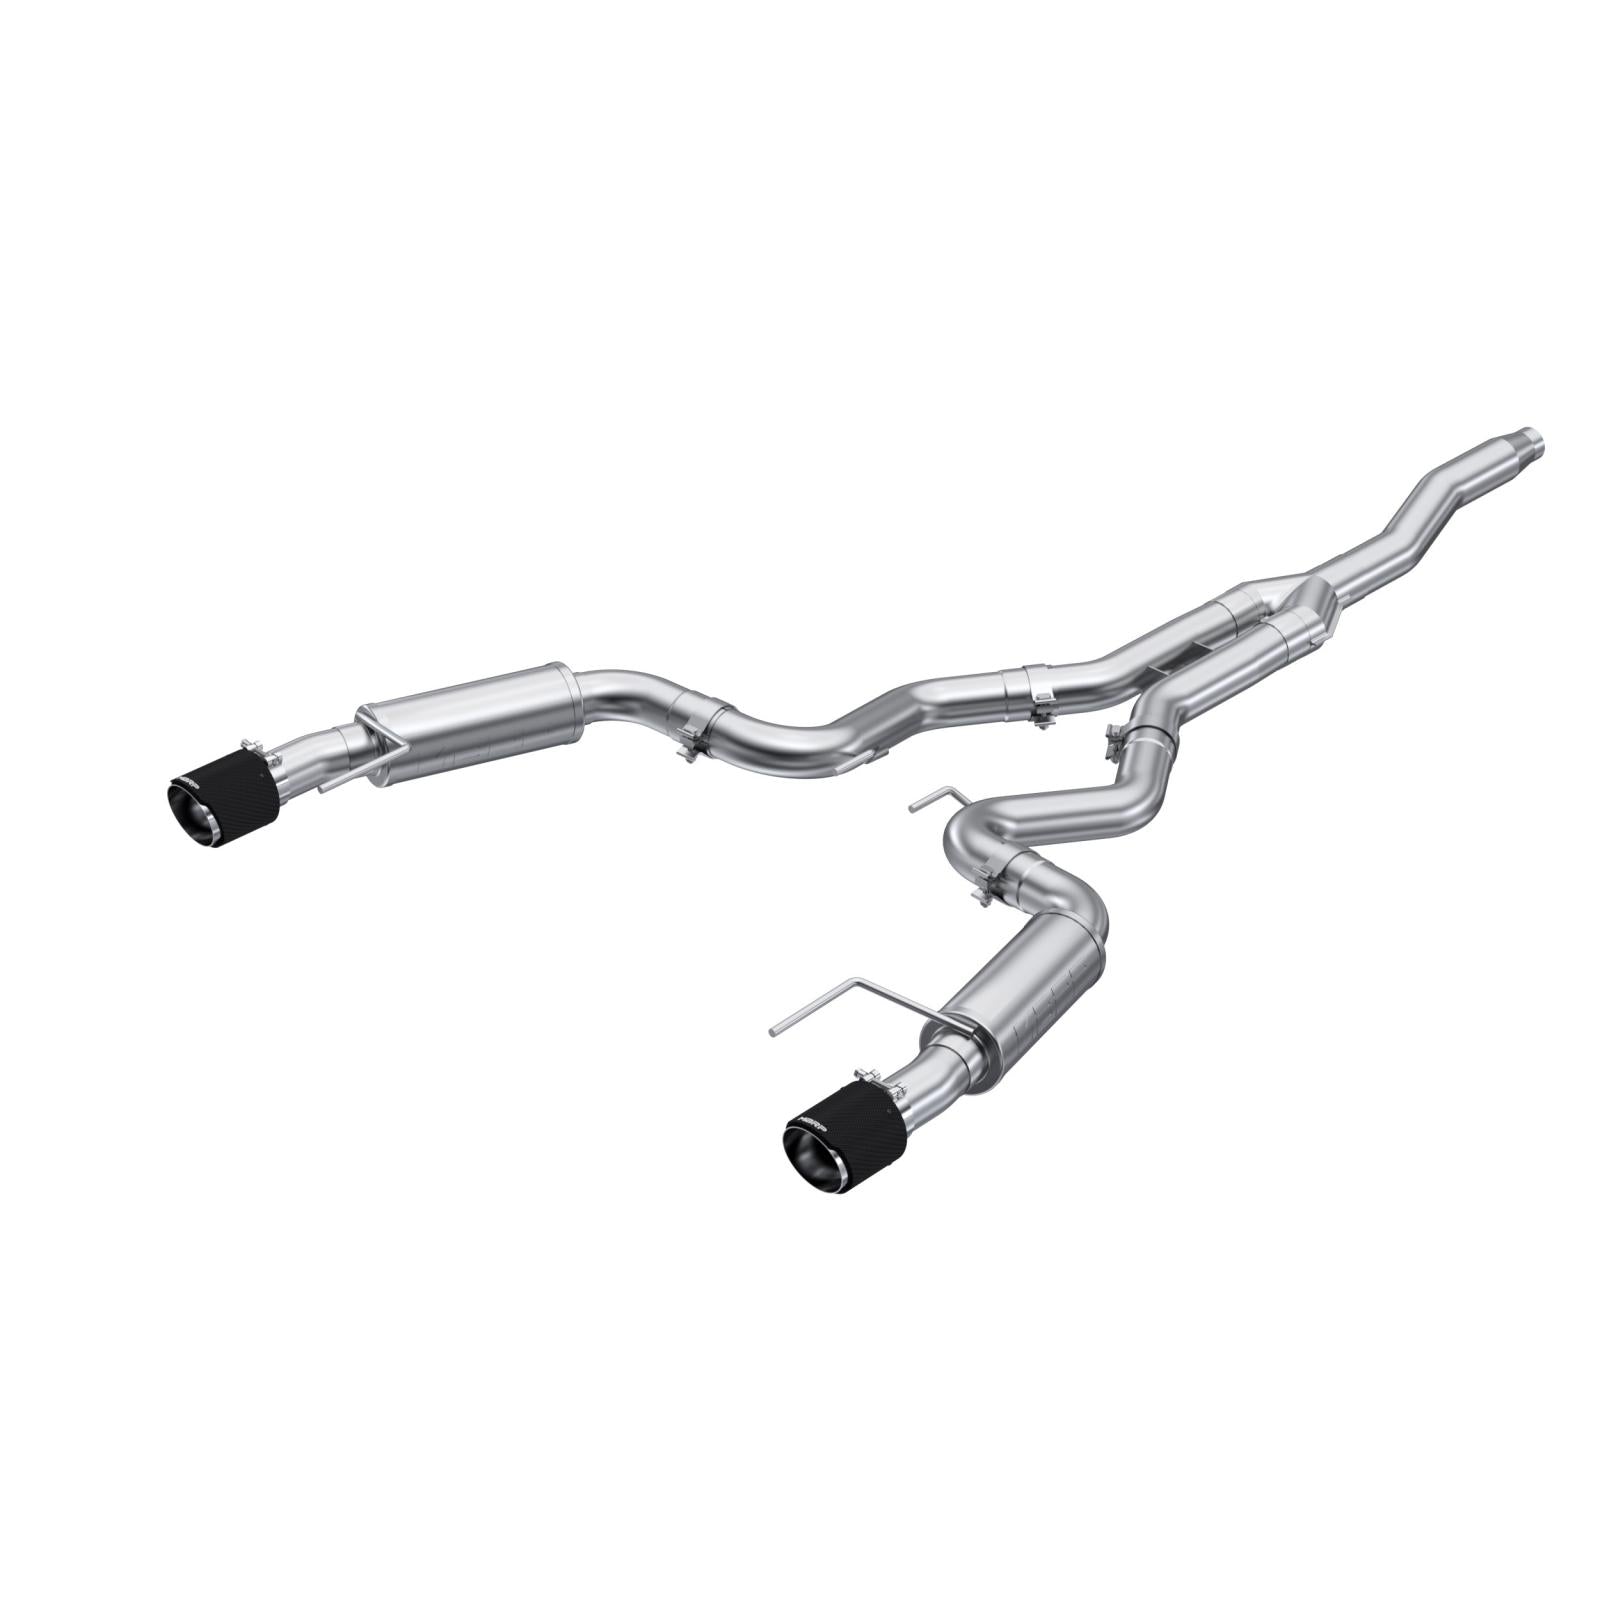 MBRP Exhaust 2015-2018 Ford Mustang 2.3L EcoBoost and 2019-Up Ford Mustang 2.3L EcoBoost T304 Stainless Steel 3 Inch Cat-Back Dual Split Rear with Carbon Fiber Tips Race Version MBRP S72753CF